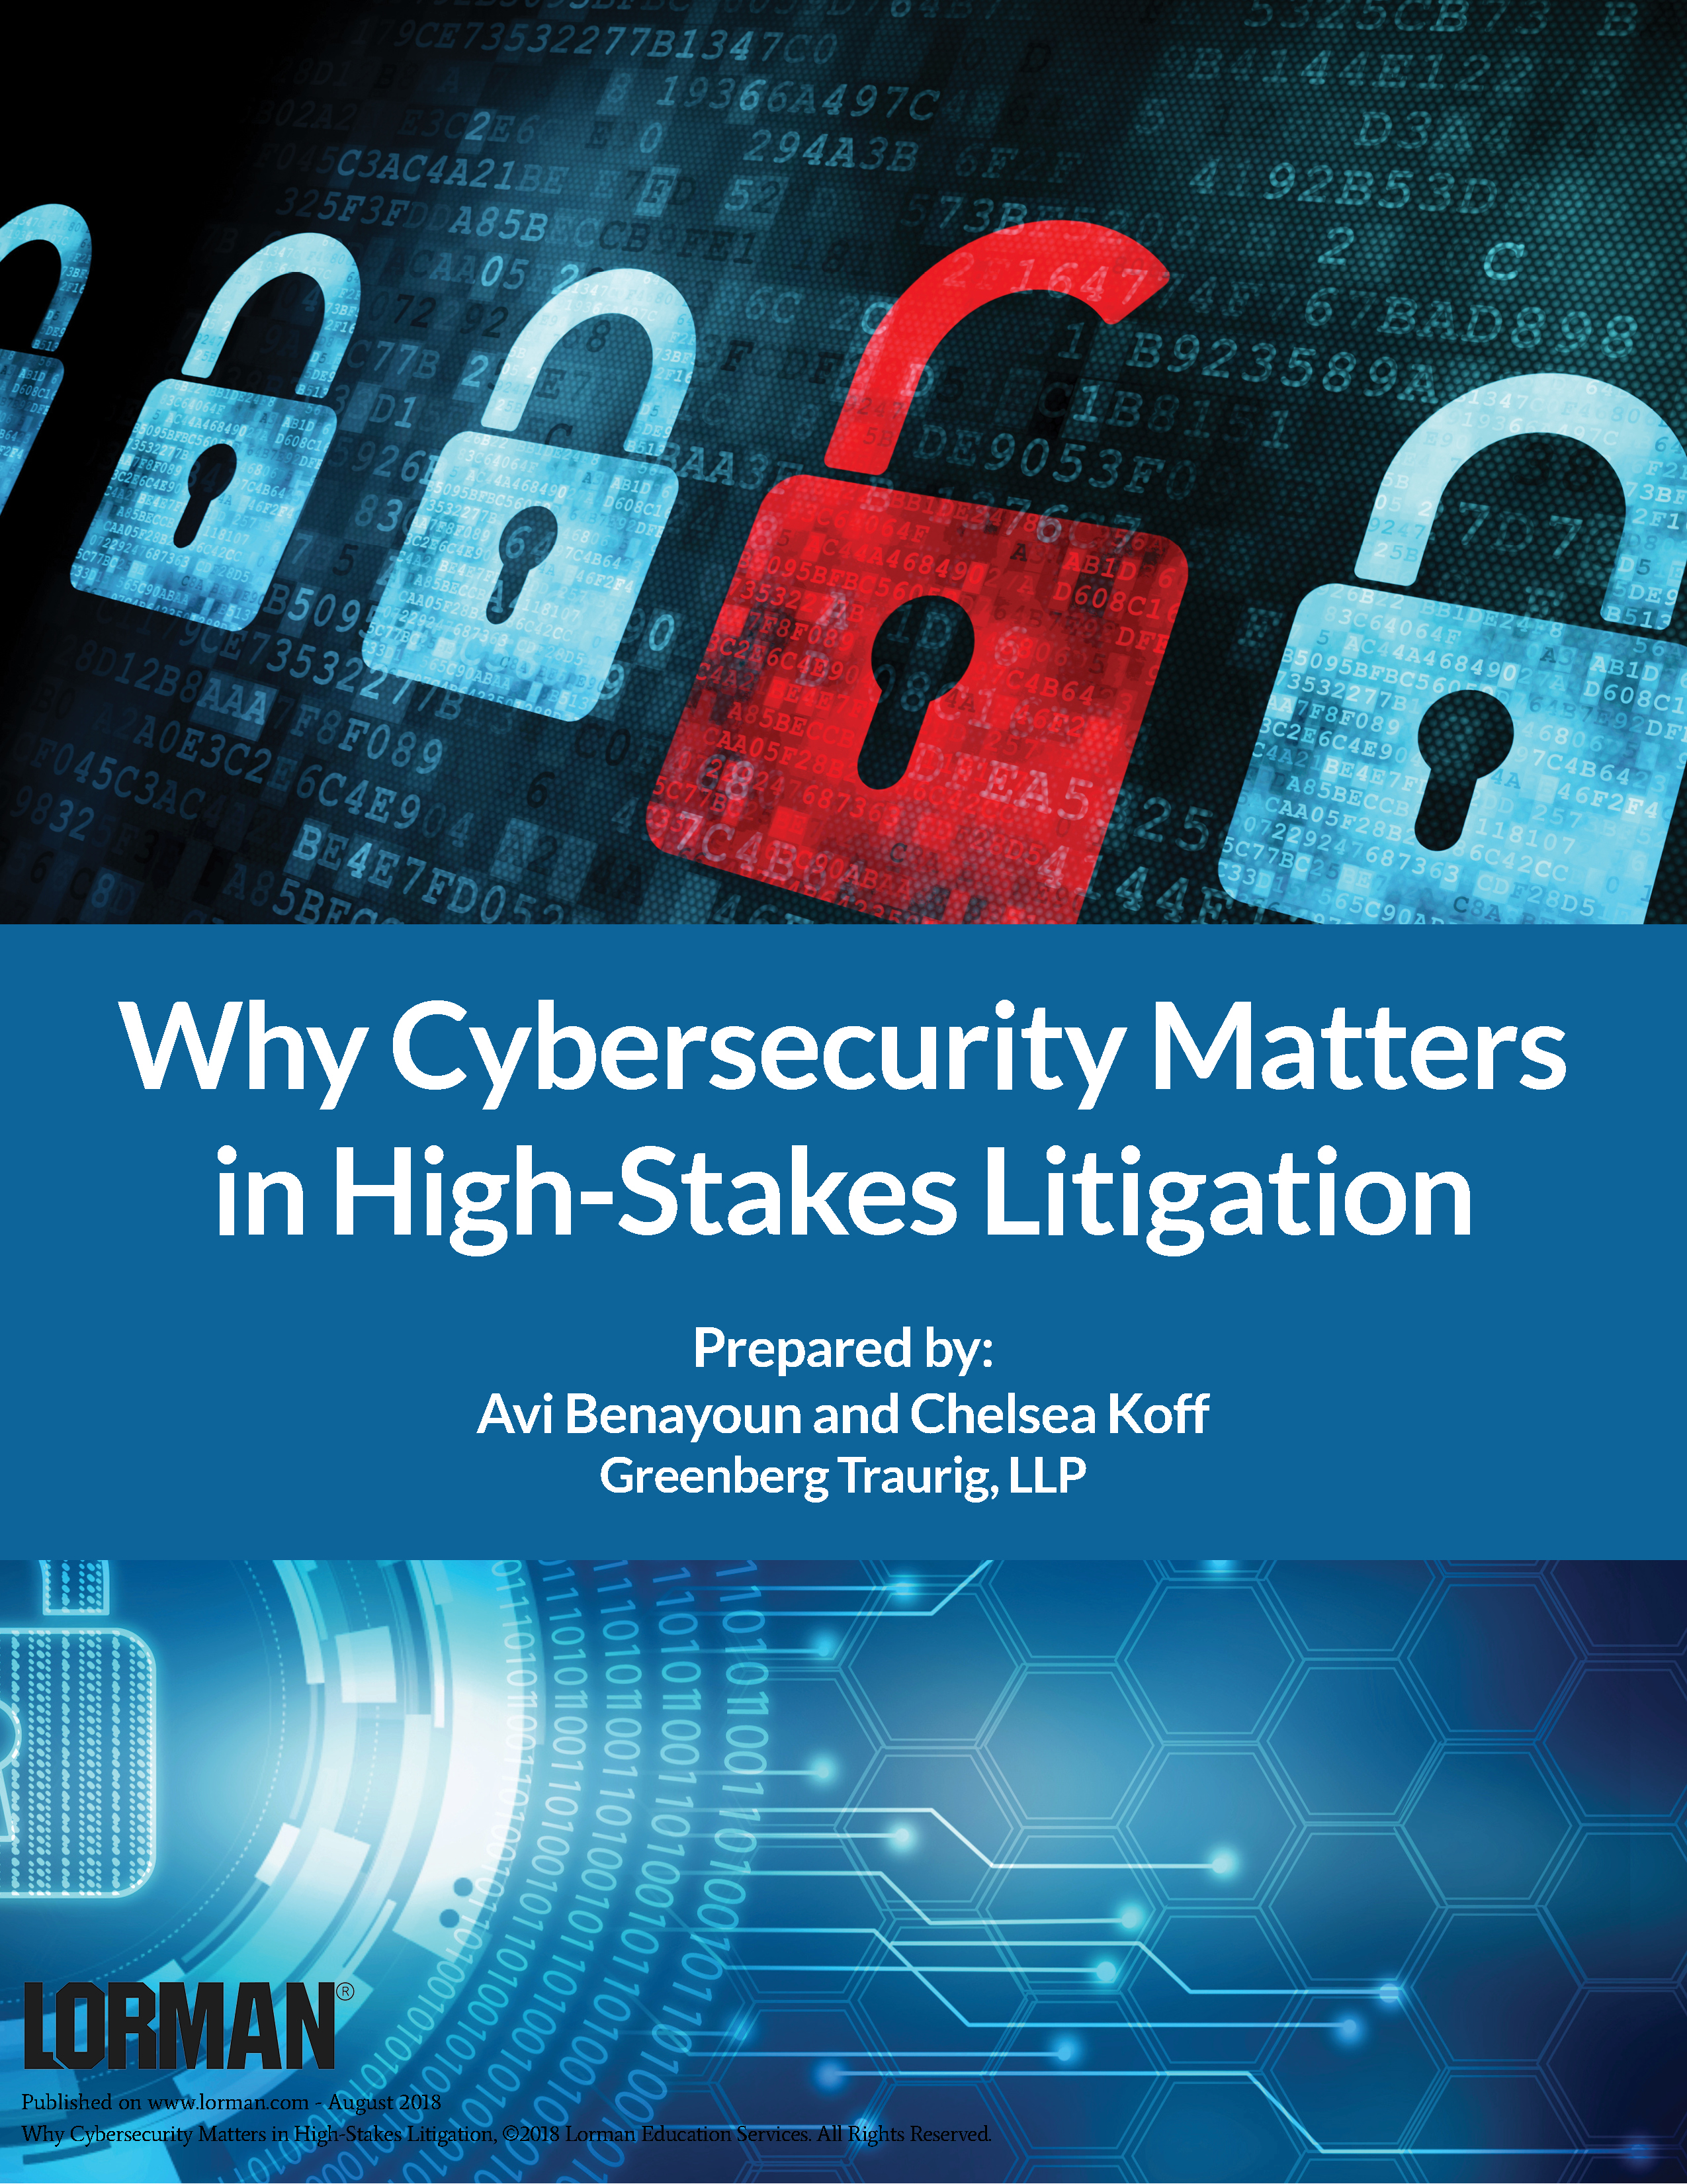 Why Cybersecurity Matters in High-Stakes Litigation